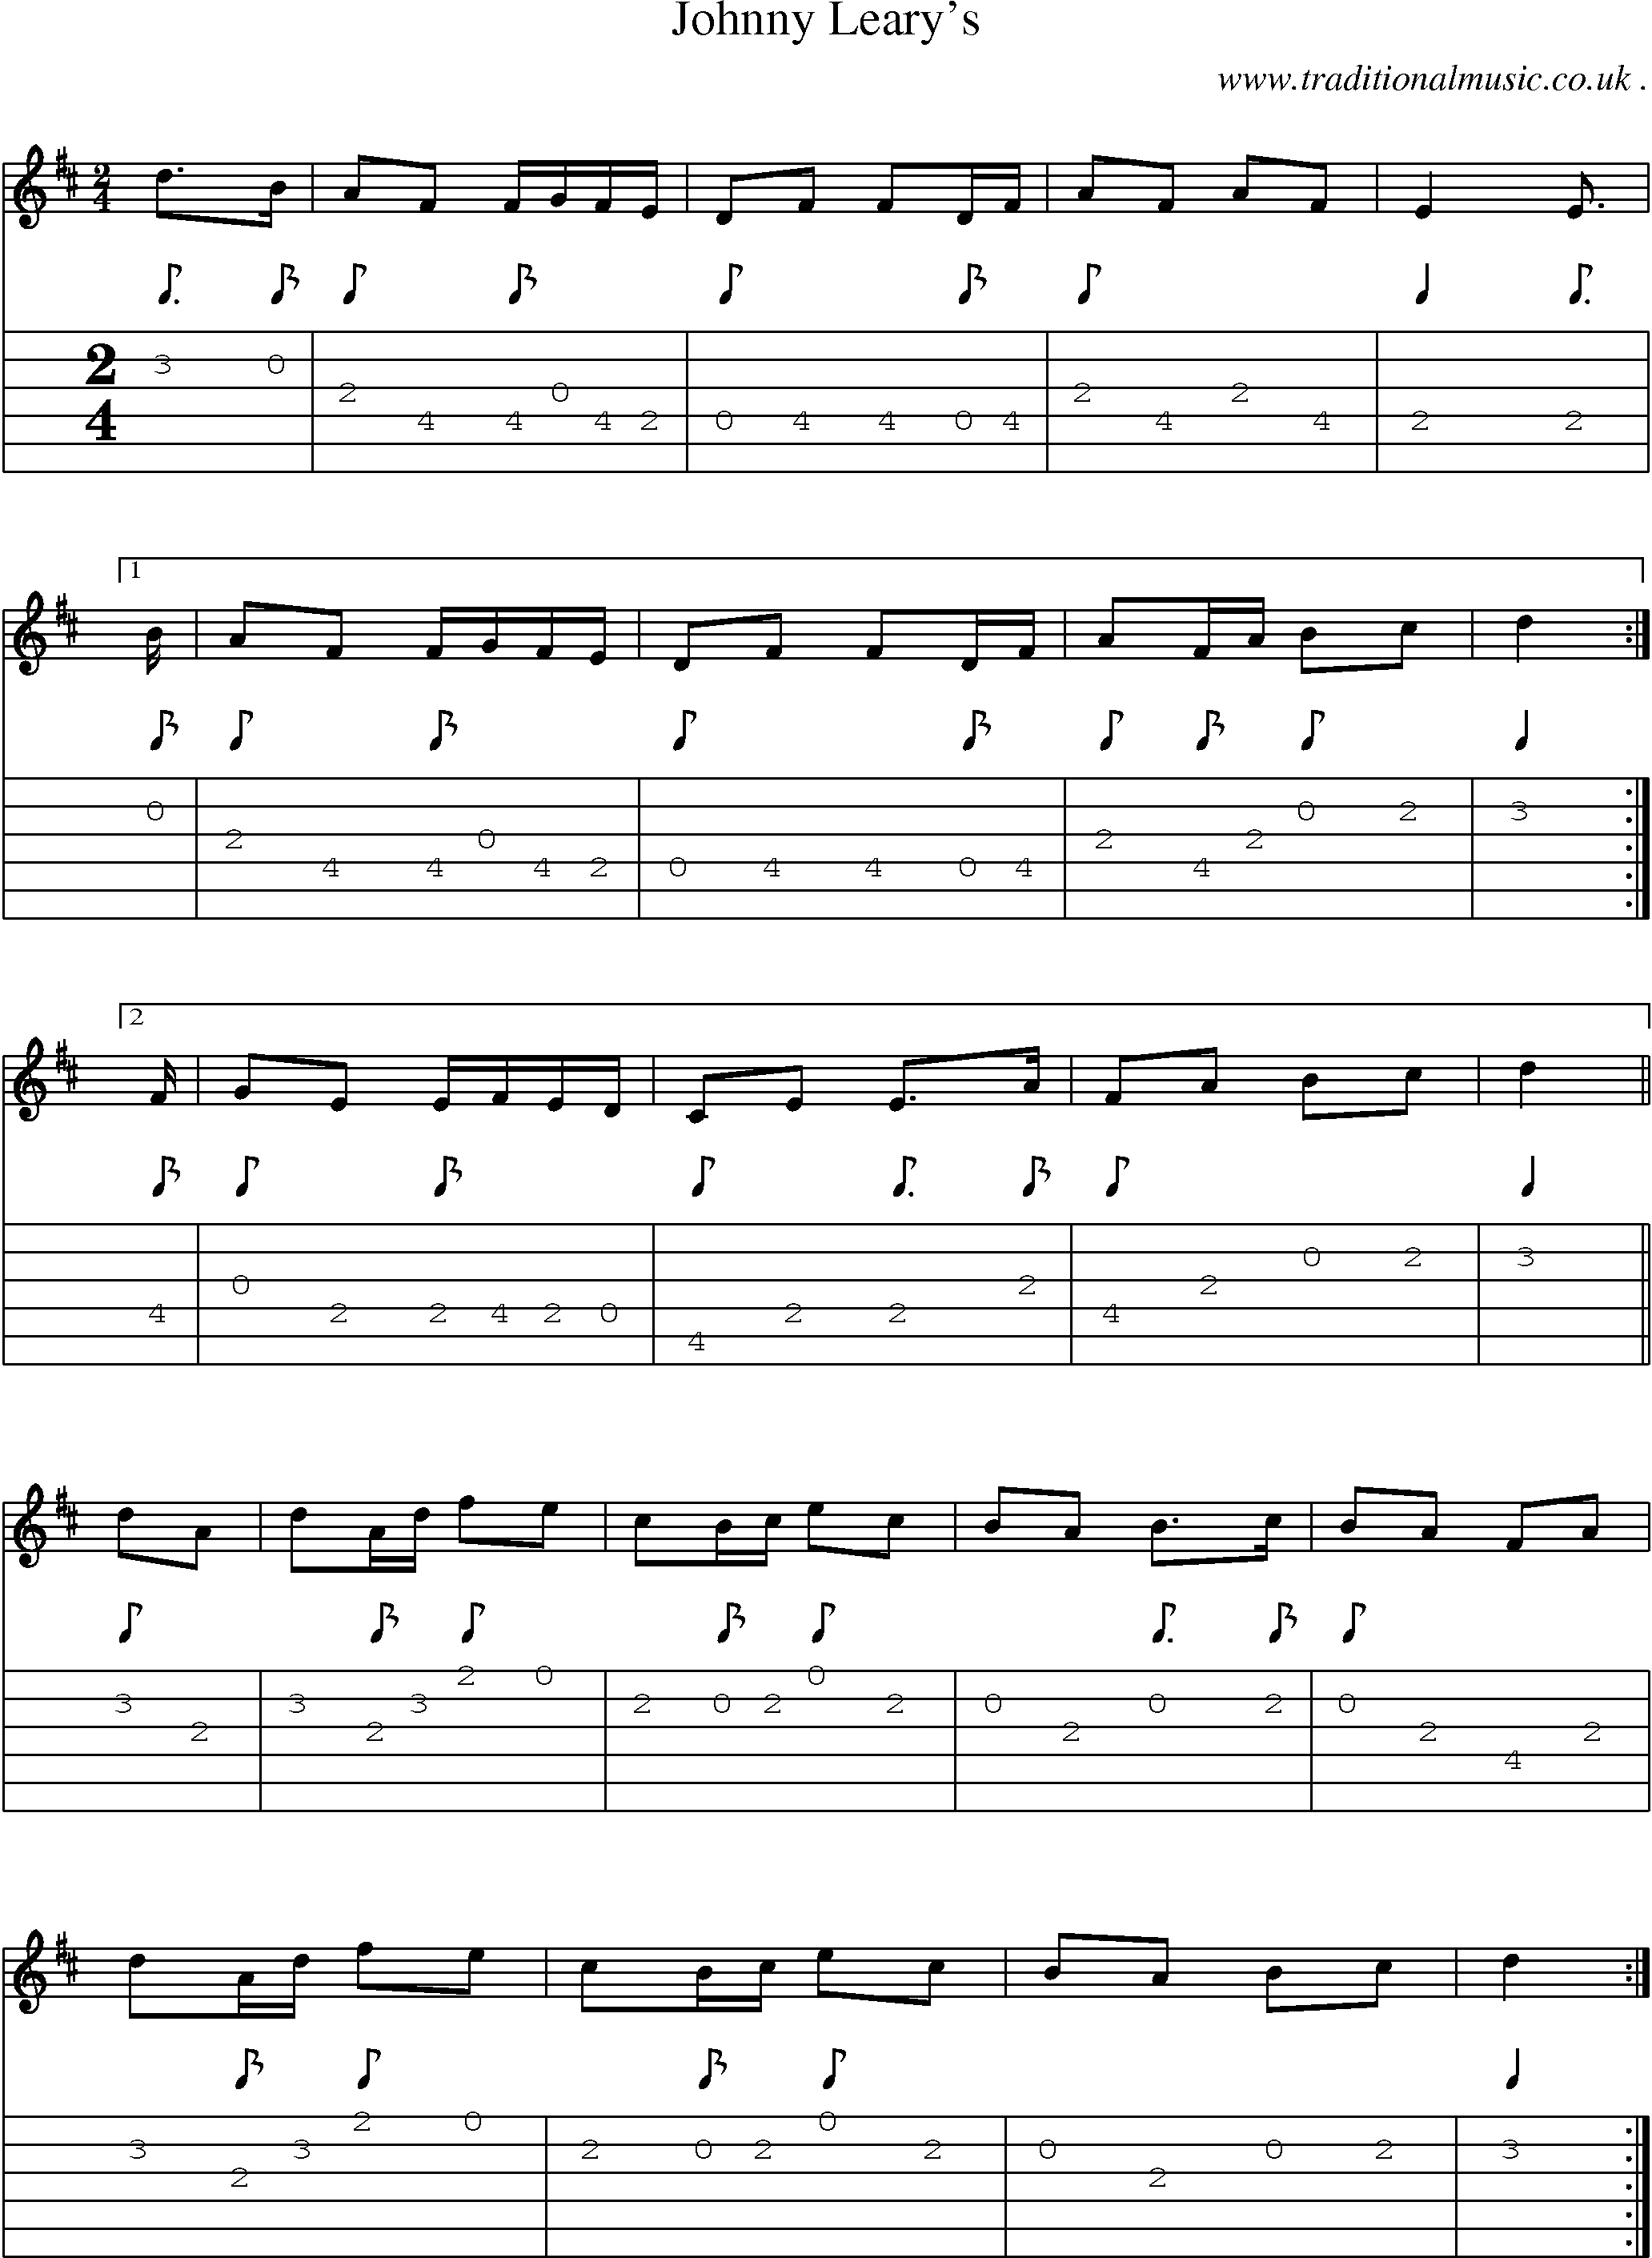 Sheet-Music and Guitar Tabs for Johnny Learys